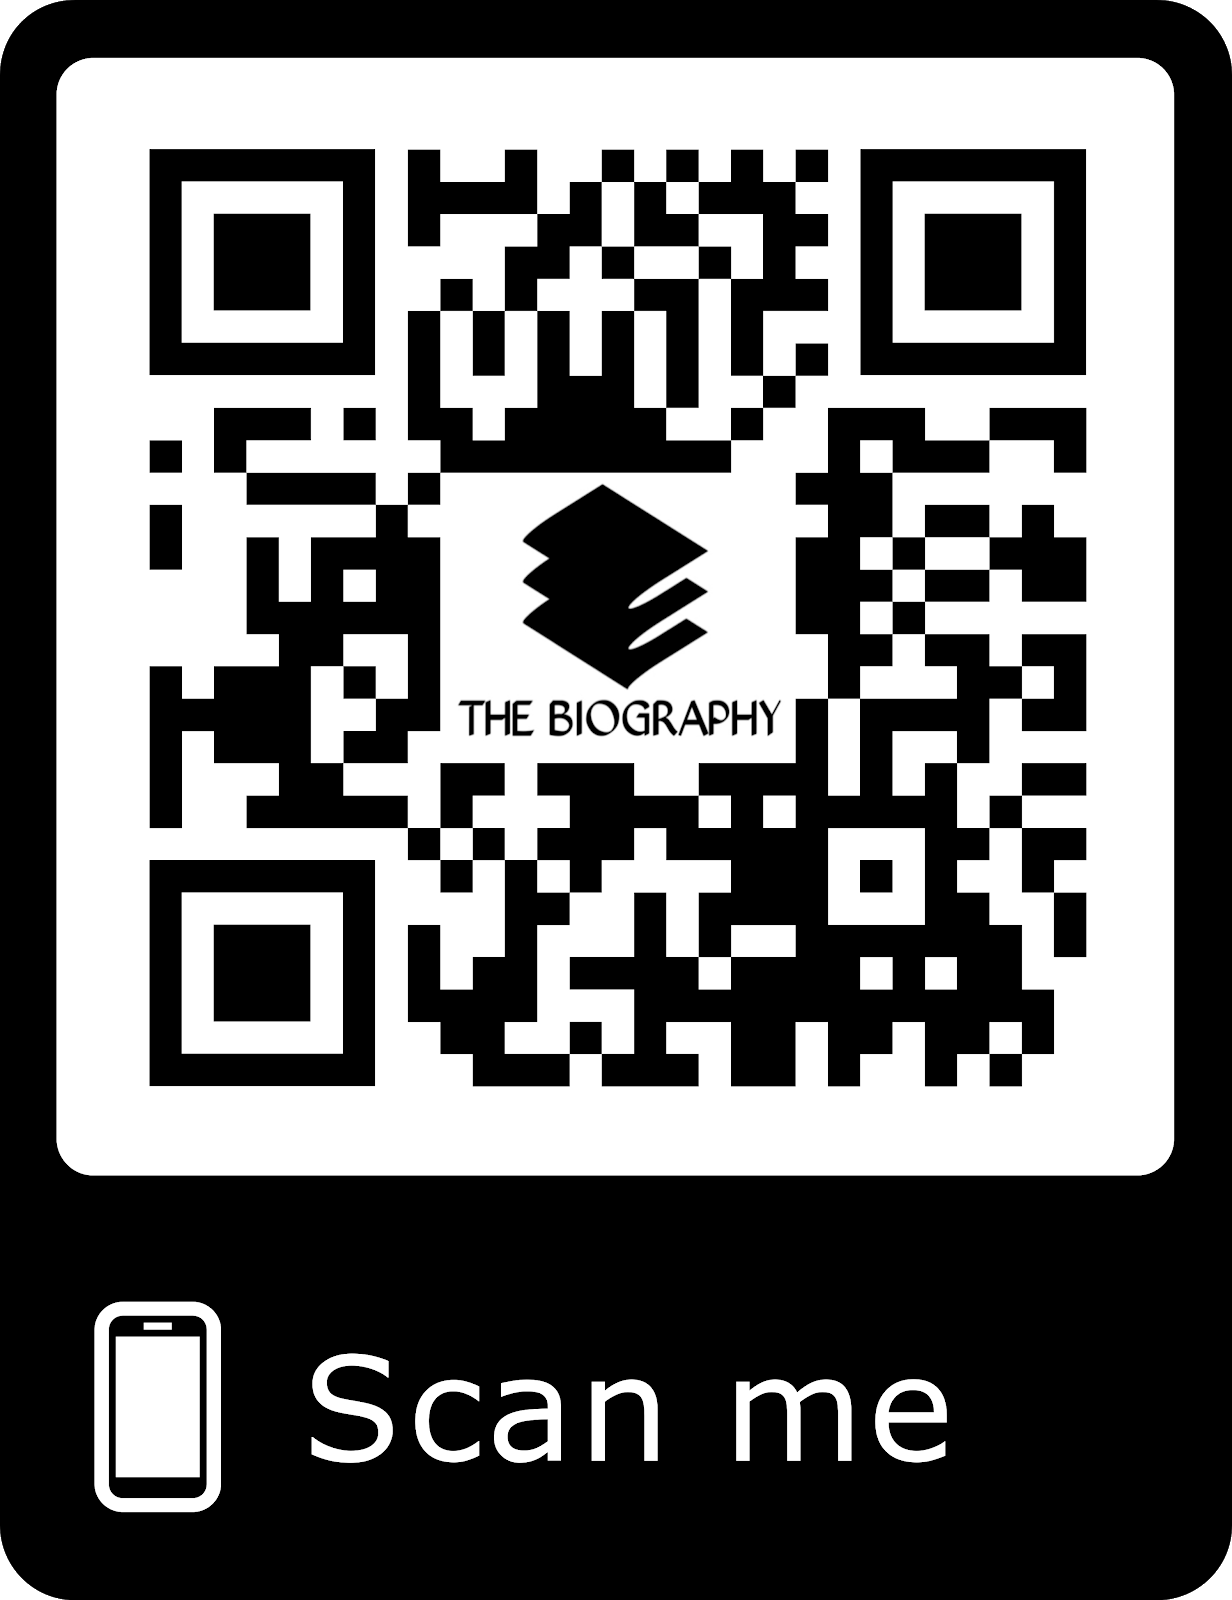 Bar Code For Biography App Download or Click The Bar Code